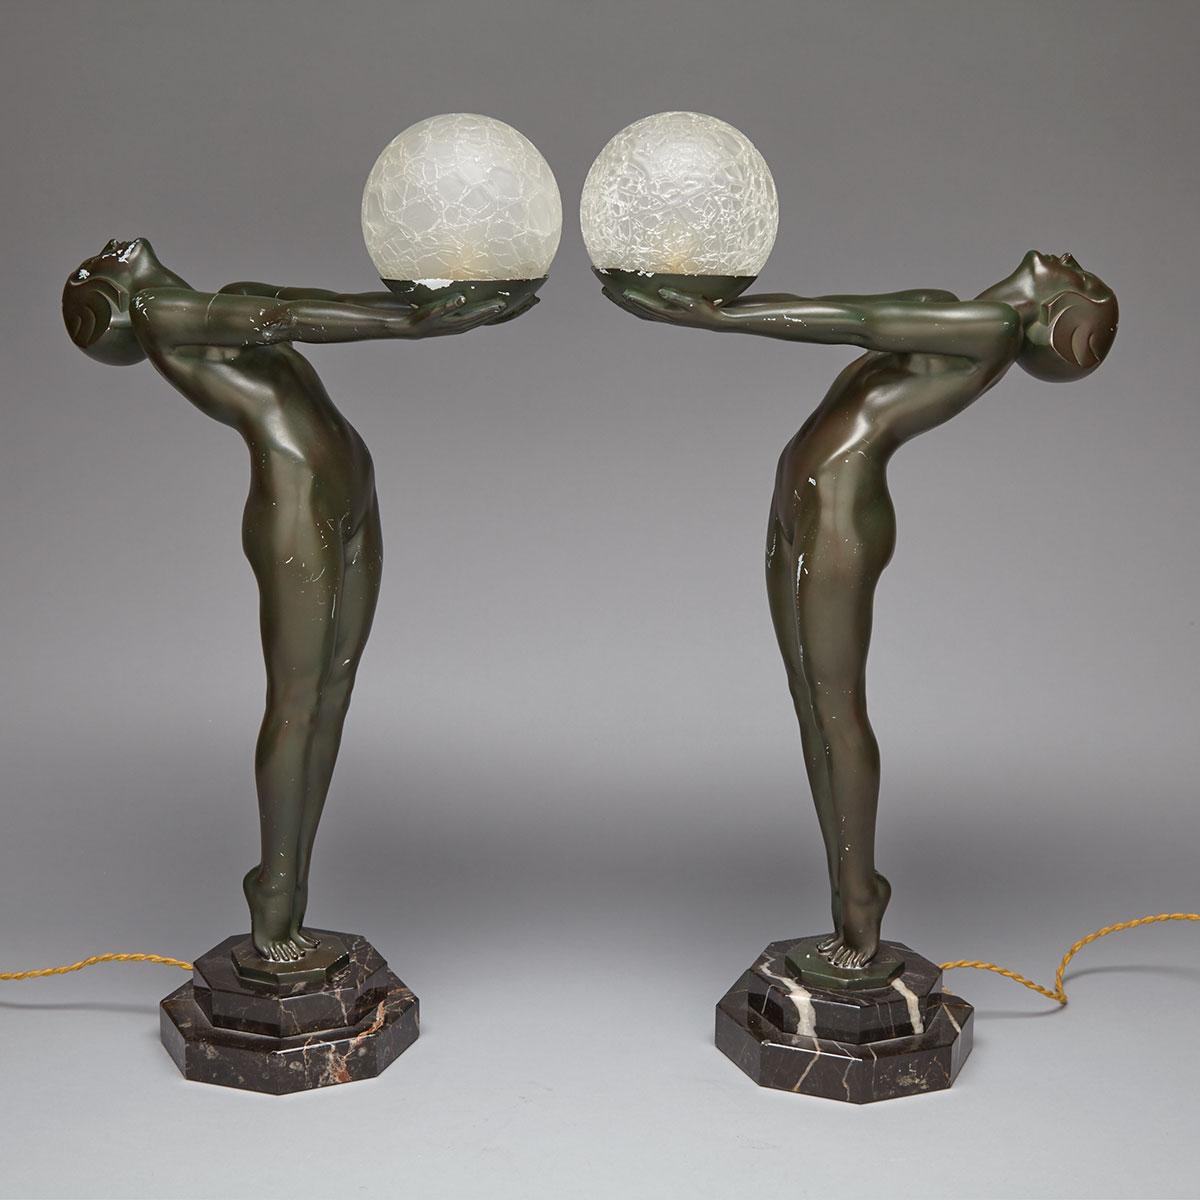 Pair of Art Deco Figural Table Lamps after Max Le Verrier (1891-1973), late 20th century